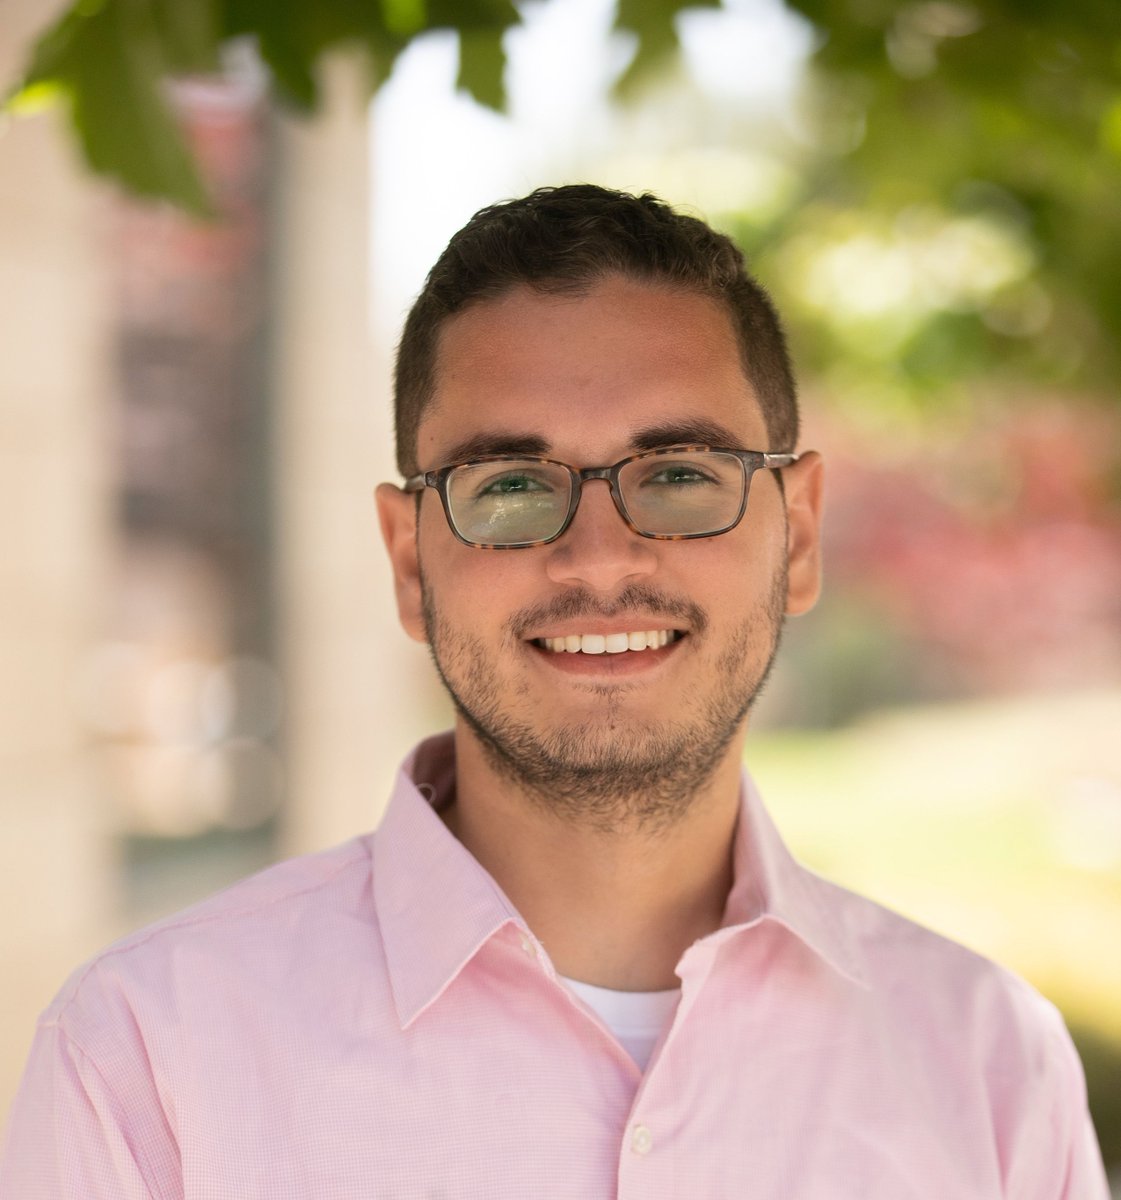 Omar Ahmed @oyfahmed is a JXTX/CSHL scholarship recipient from @JohnsHopkins who will present 'Compressed pangenome indexing for rapid and robust taxonomic read classification' at #bog24 jxtxfoundation.org/news/2024-02-2…